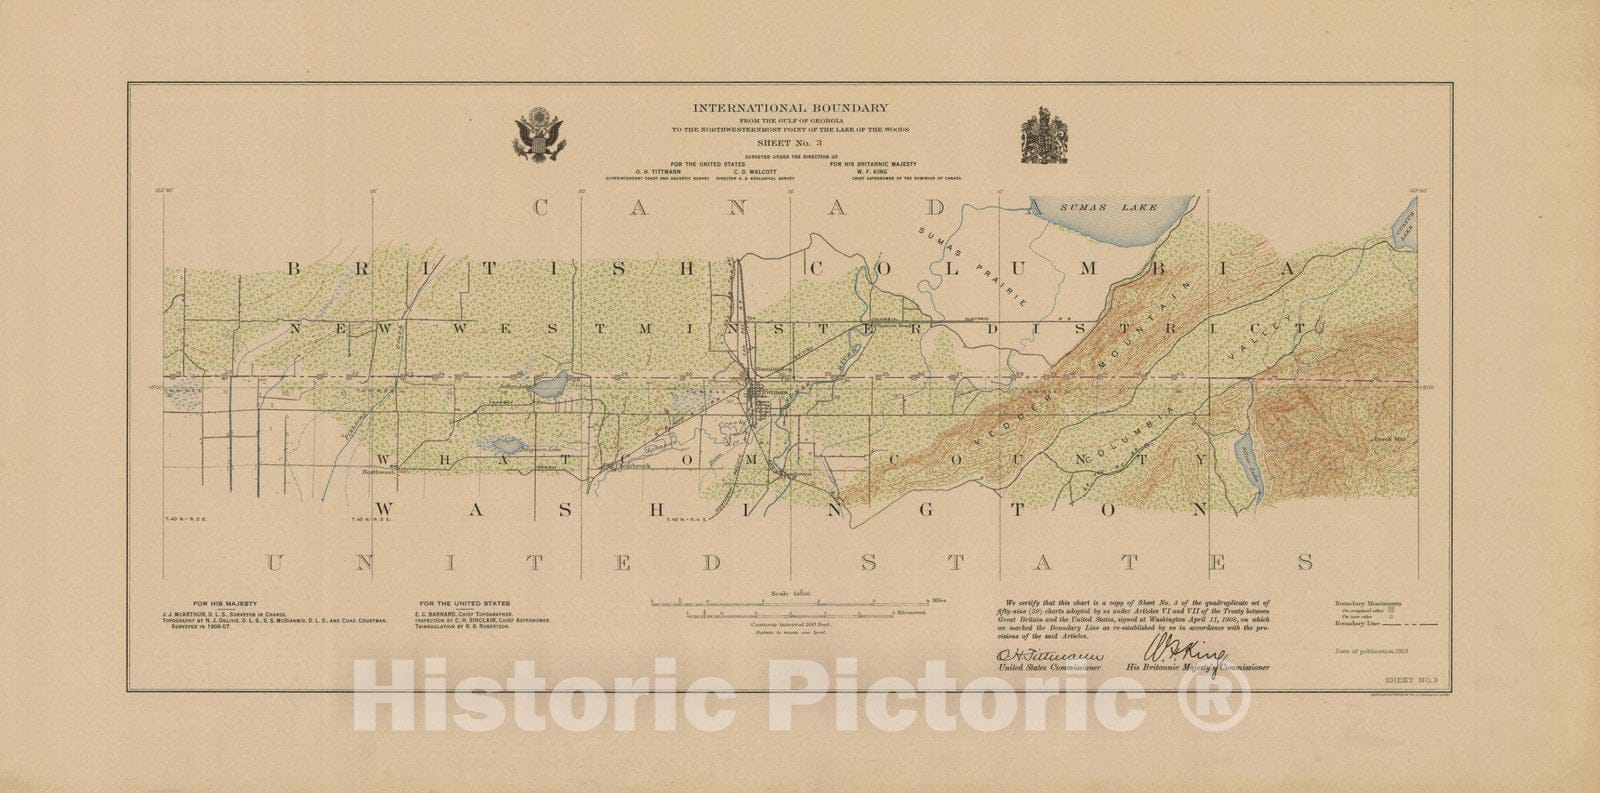 Historic Nautical Map - International Boundary, From The Gulf Of Georgia To The Northwestern Point Of The Lake To The Woods, Sheet No.3, WA, 1913 NOAA Topographic - Decor Poster Wall Art Reproduction - 0